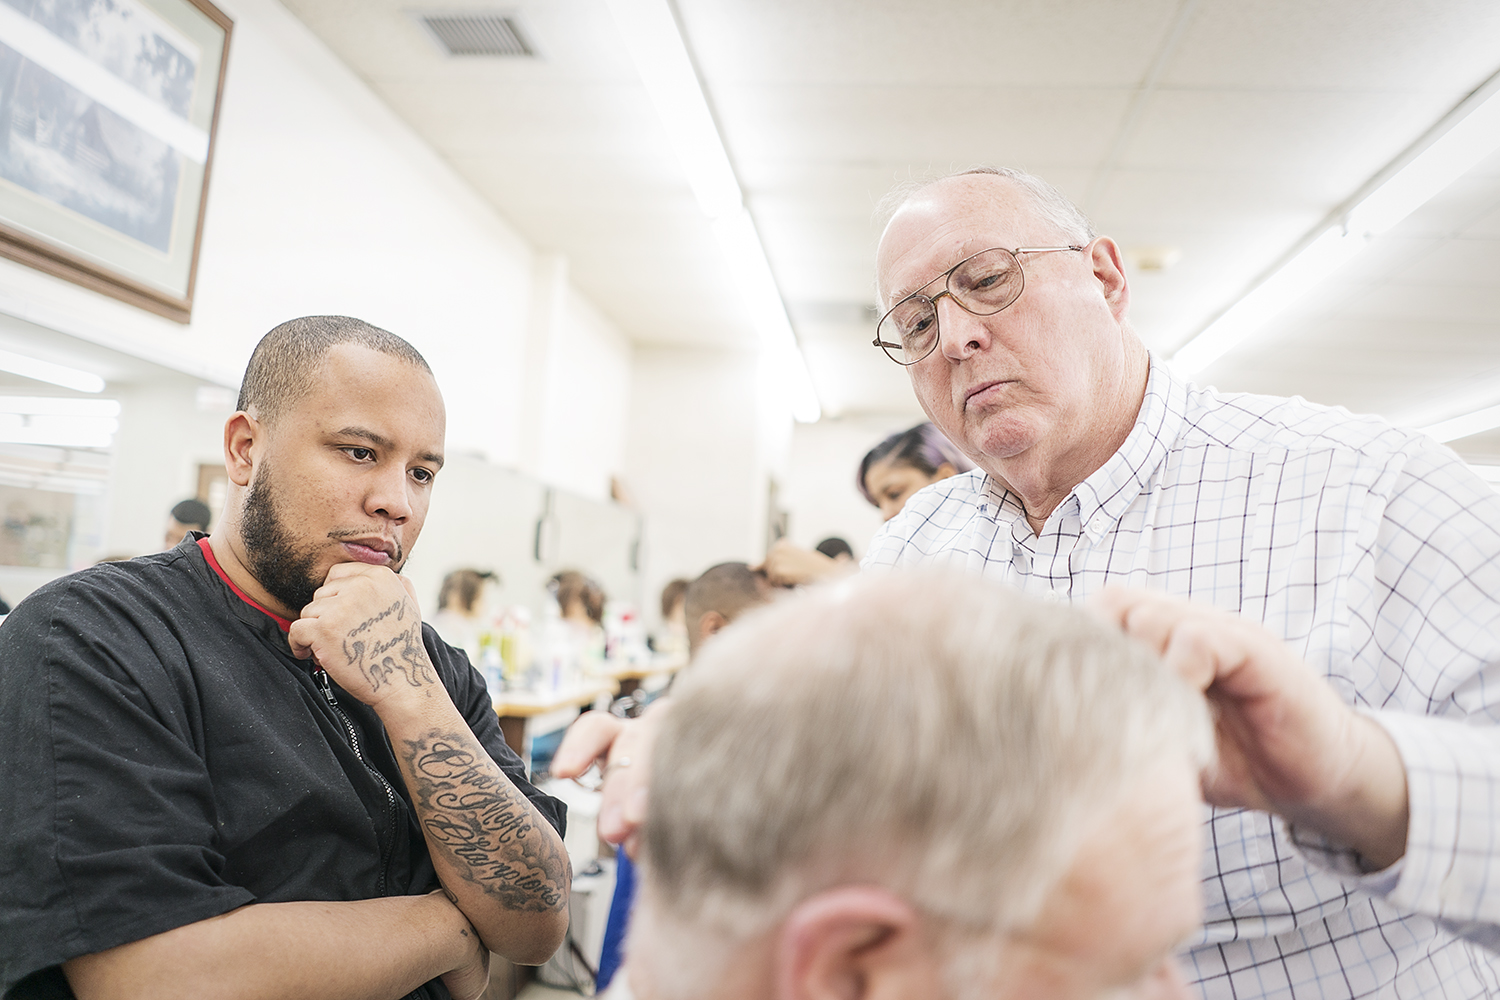 Flint, MI - Tuesday, February 6, 2018: Instructor Larry Woodby, 70, from Linden (right), examines a customer's cut by barber Chris Hampton, 29, from Flint, at the Flint Institute of Barbering.